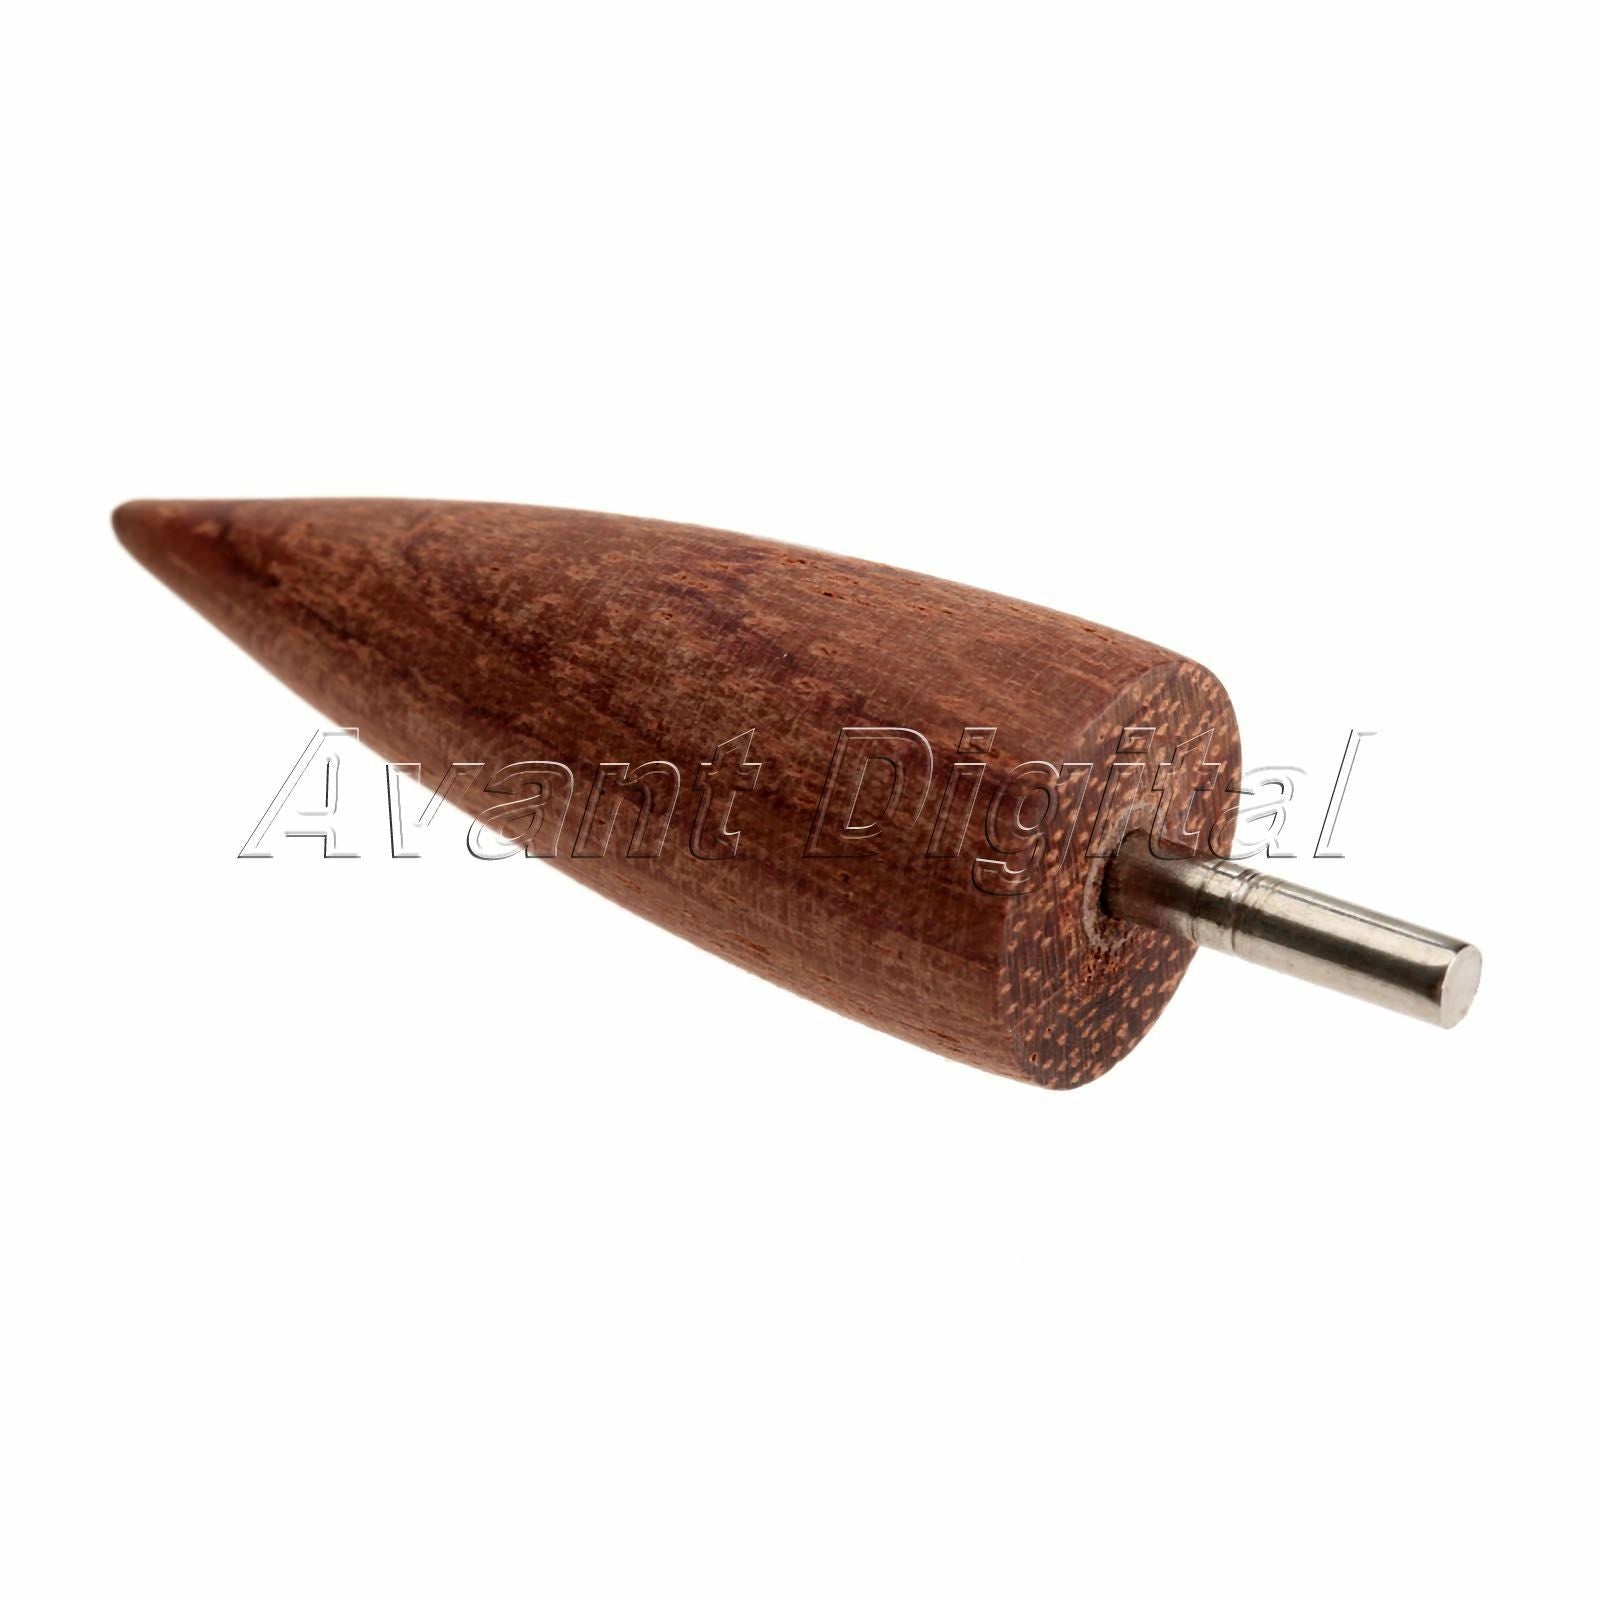 7 Sizes Convenience Leather Craft Burnisher Leather Slicker Wood Edge Tools